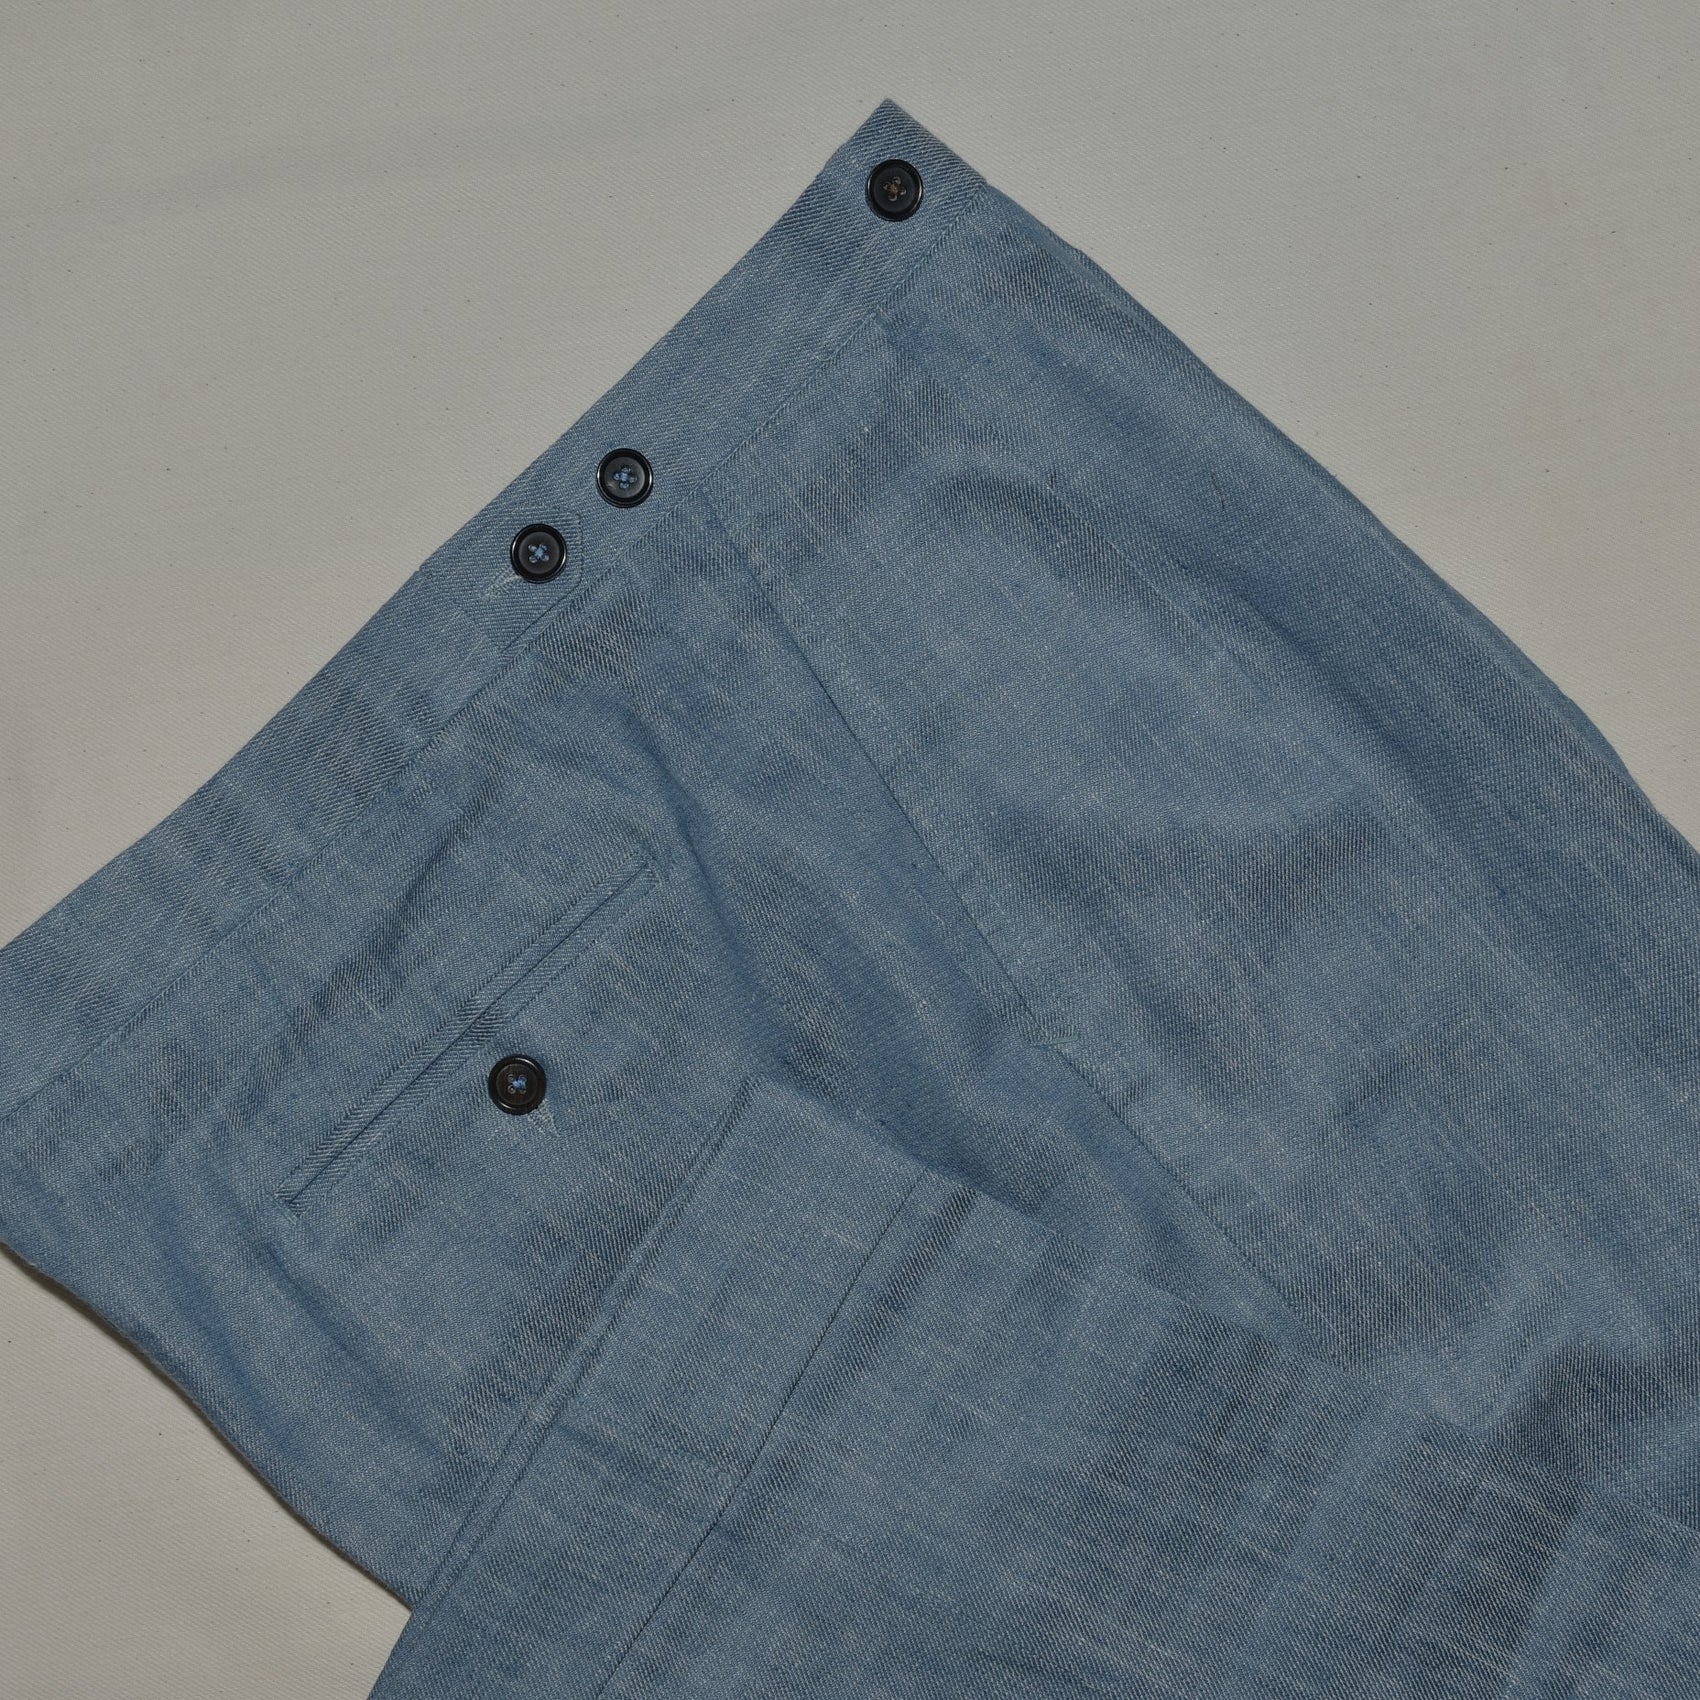 [Sample] Japanese “Washed Denim” Linen Trousers  - ST106